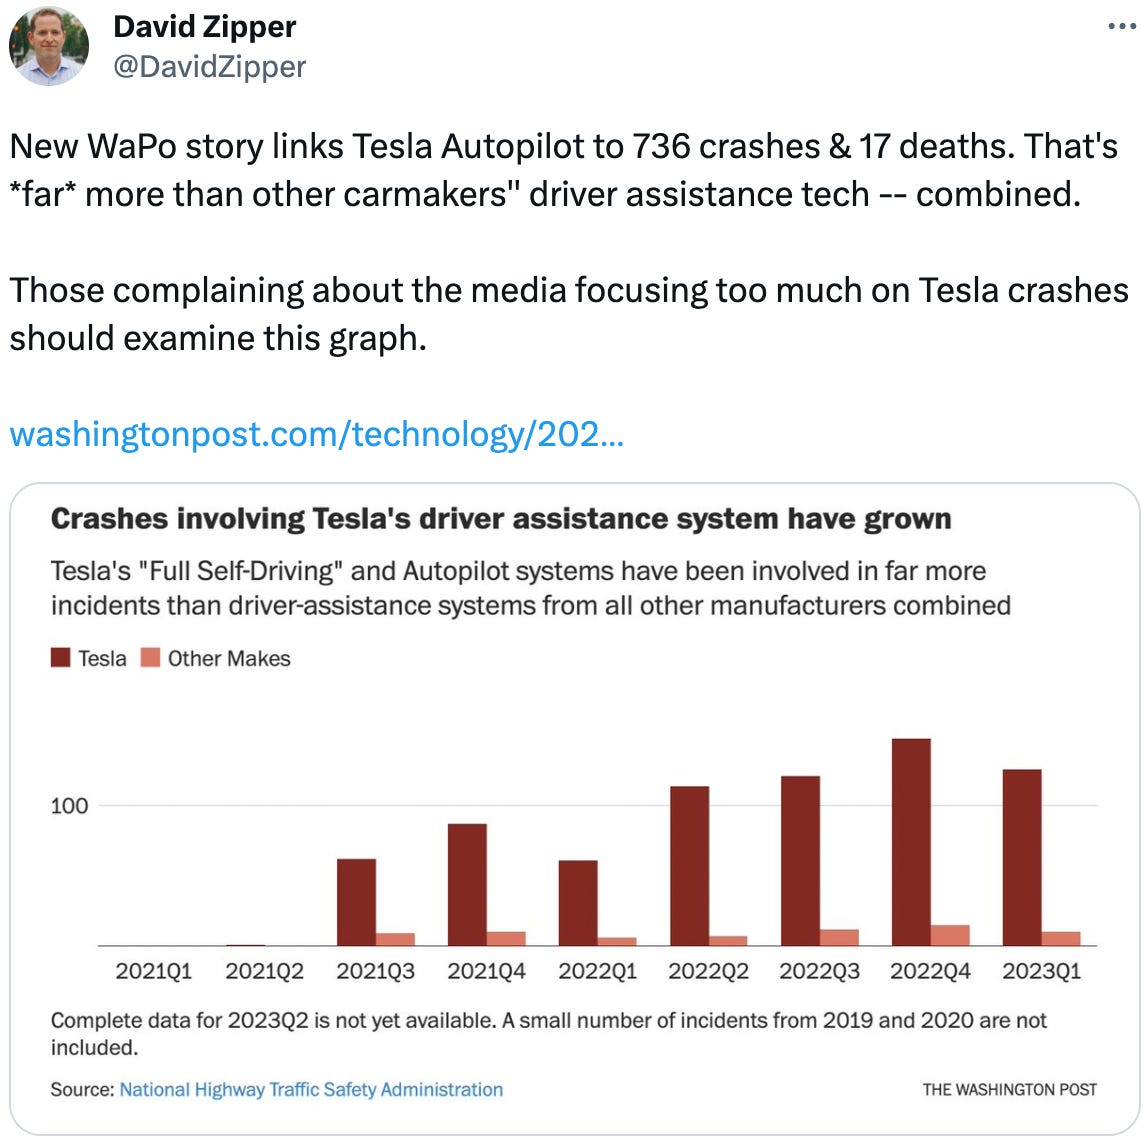  David Zipper @DavidZipper New WaPo story links Tesla Autopilot to 736 crashes & 17 deaths. That's *far* more than other carmakers'' driver assistance tech -- combined.  Those complaining about the media focusing too much on Tesla crashes should examine this graph.    https://washingtonpost.com/technology/2023/06/10/tesla-autopilot-crashes-elon-musk